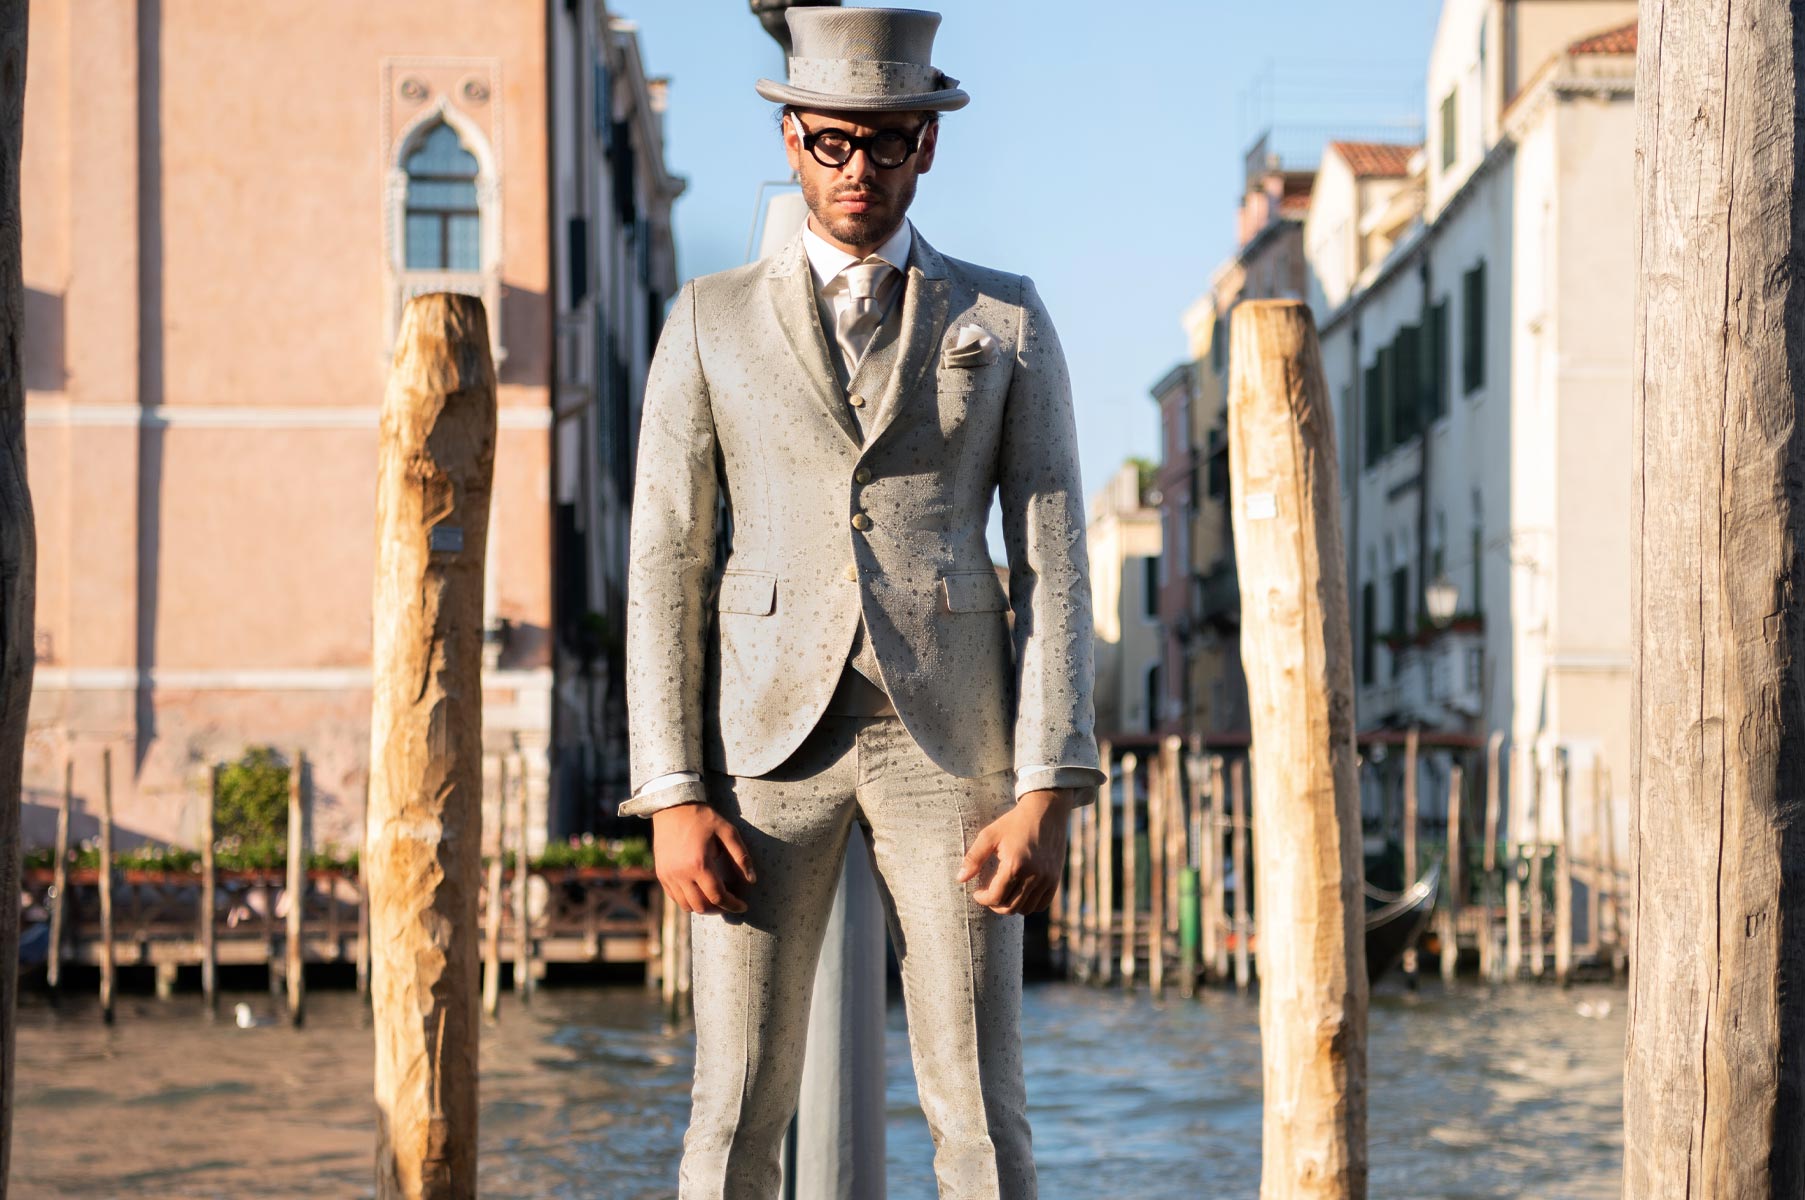 Wedding suits - by Cleofe Finati